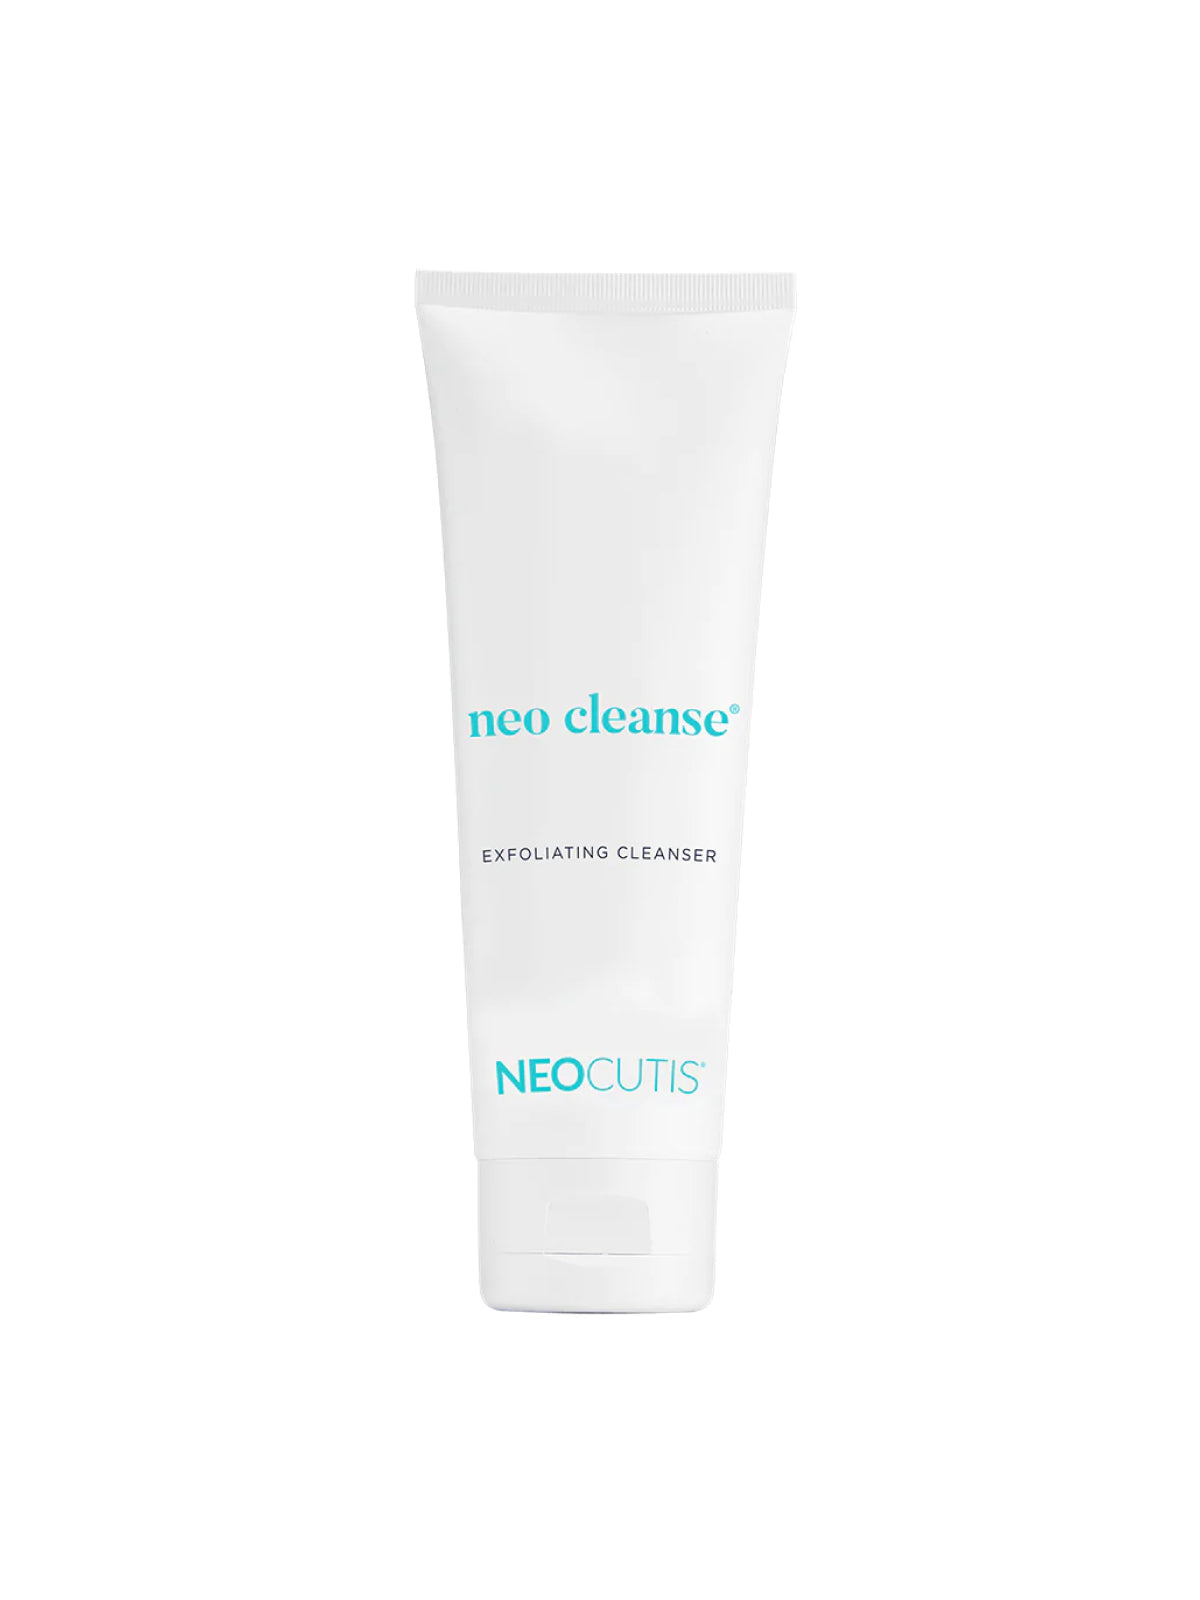 Neo Cleanse Exfoliating Cleanser